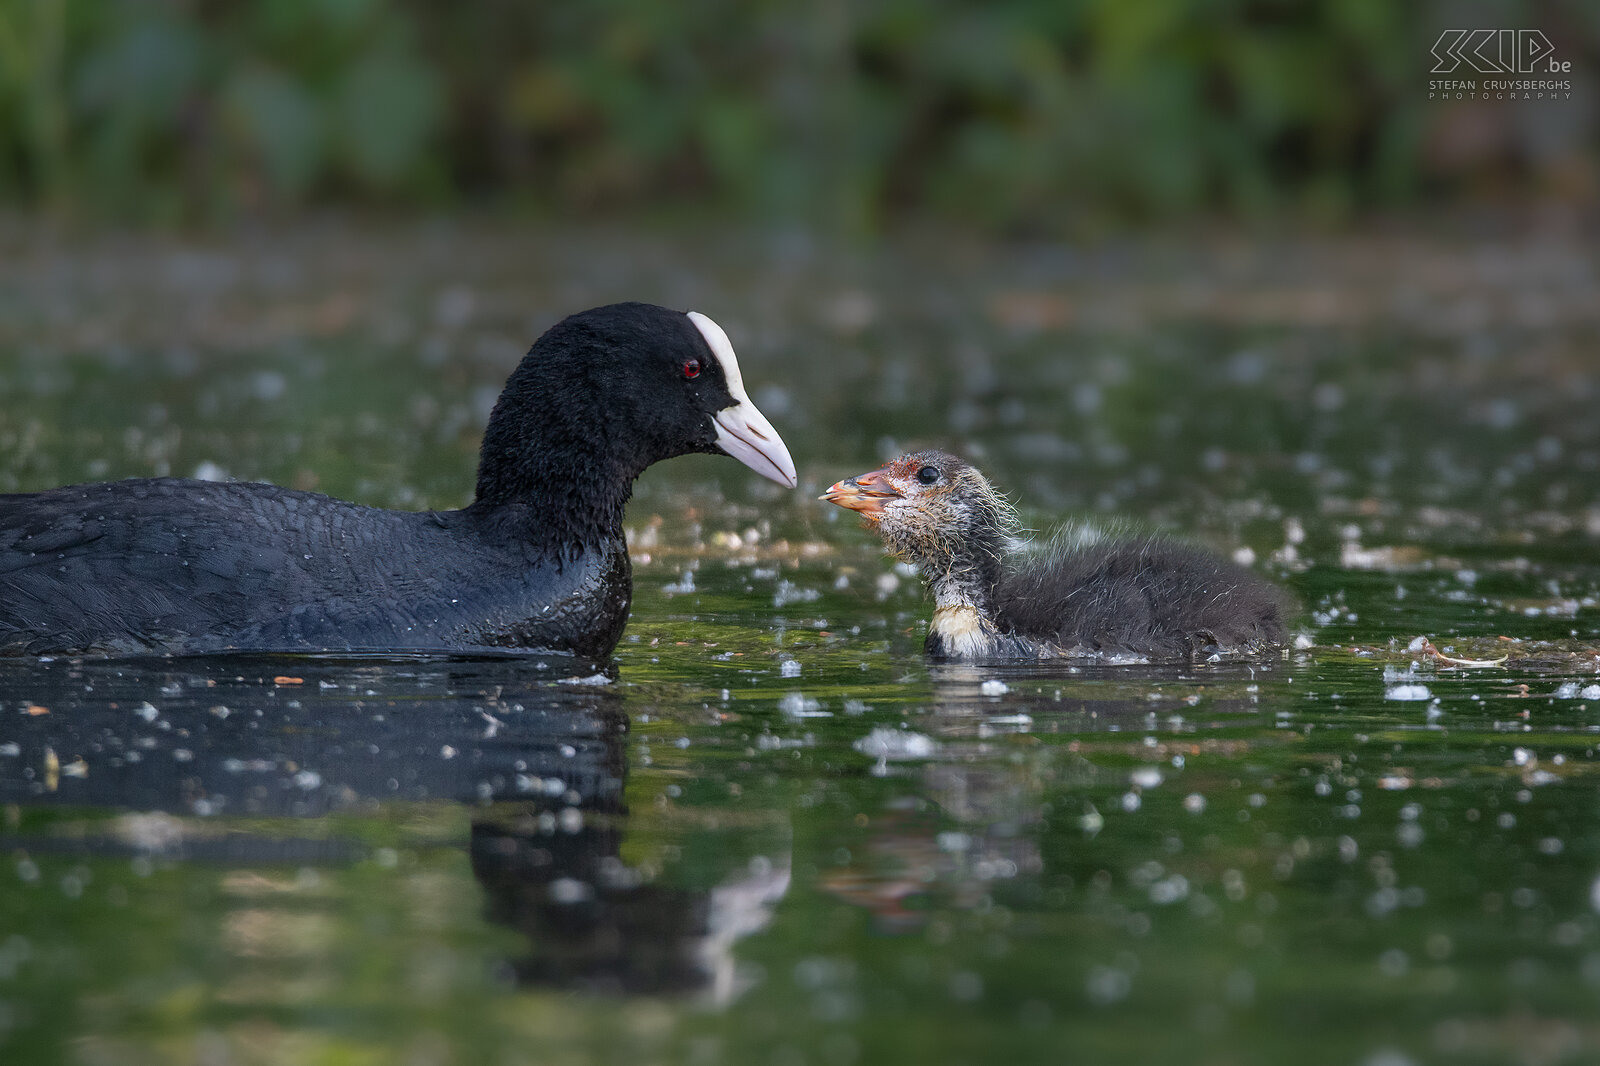 Water birds - Coot with chick Eurasian coot / Fulica atra Stefan Cruysberghs